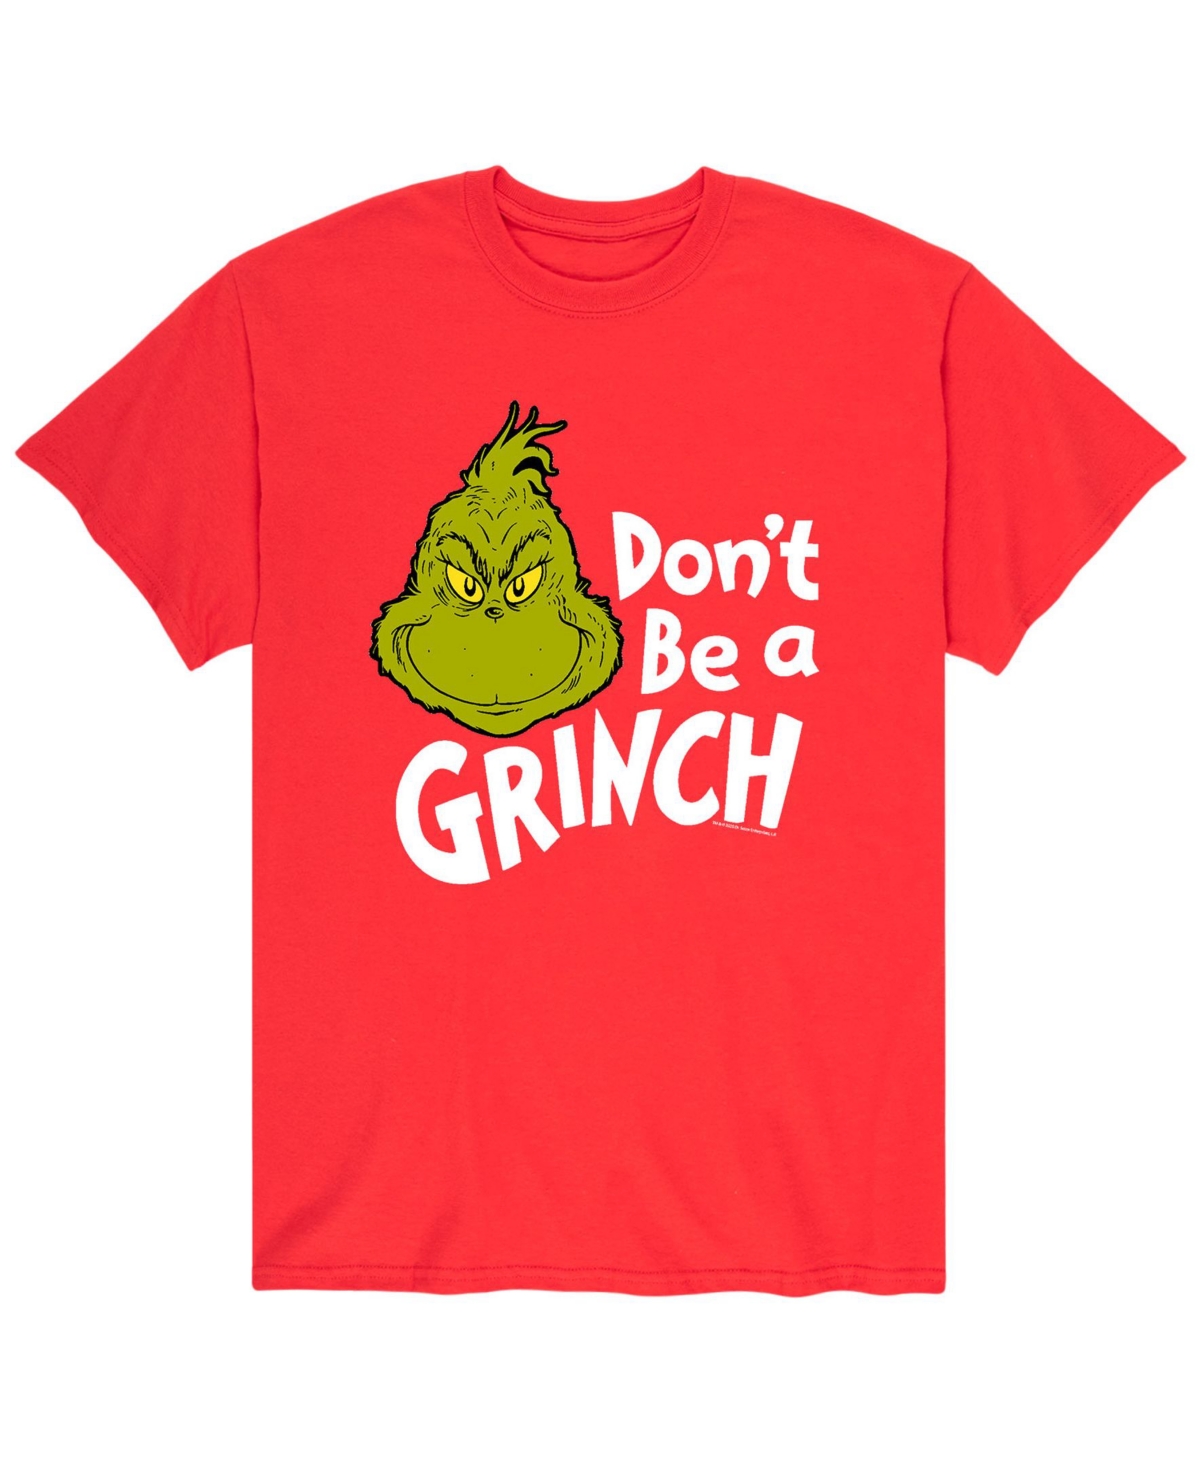 Men's Dr. Seuss The Grinch Don't Be a Grinch T-shirt - Red